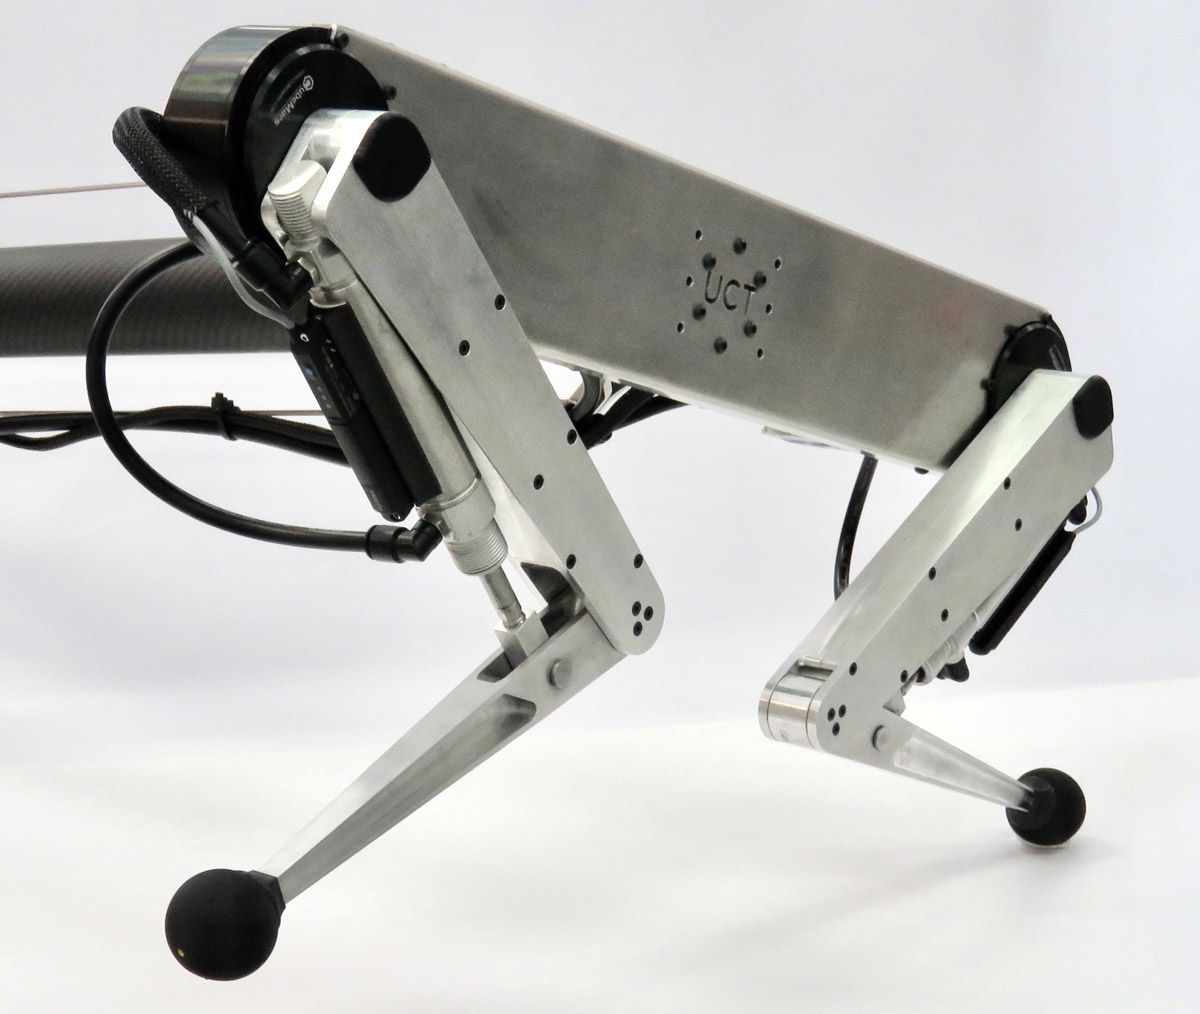 The Kemba robot with pneumatic actuators at the knees and electric motors at the hips.